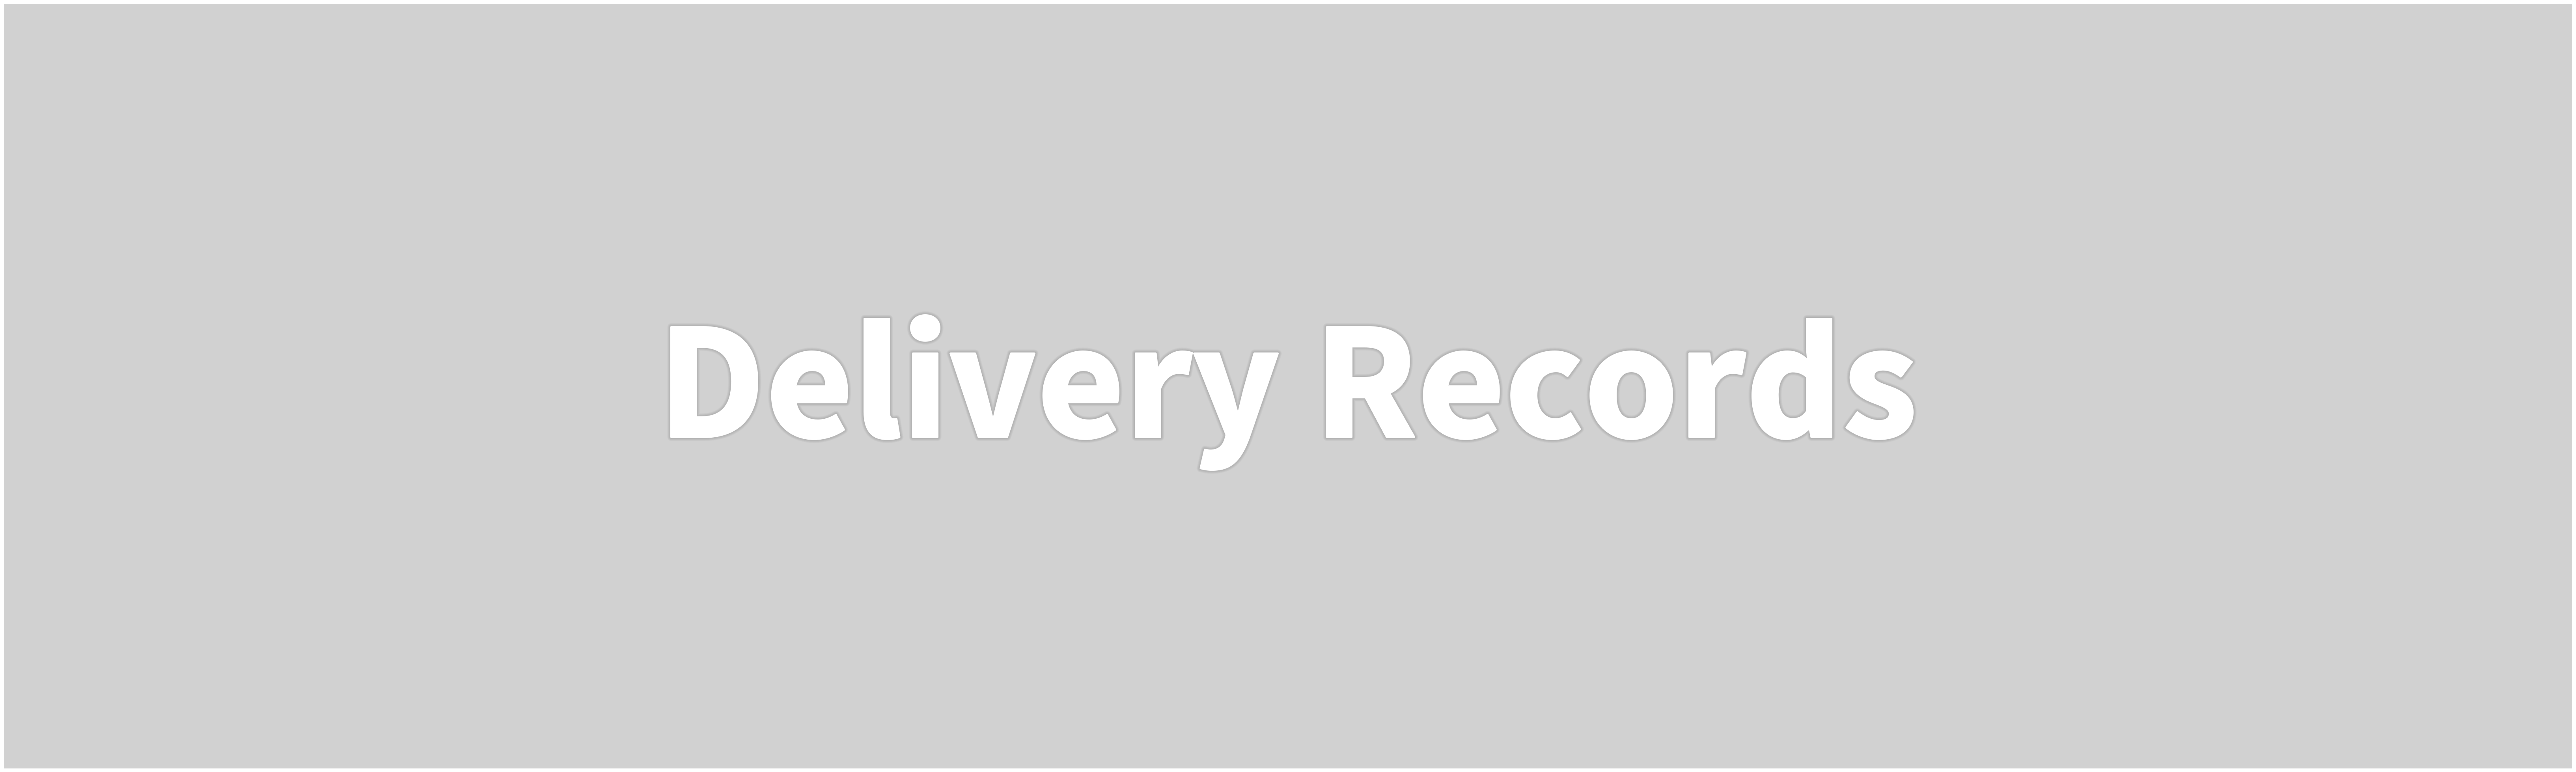 Delivery Records